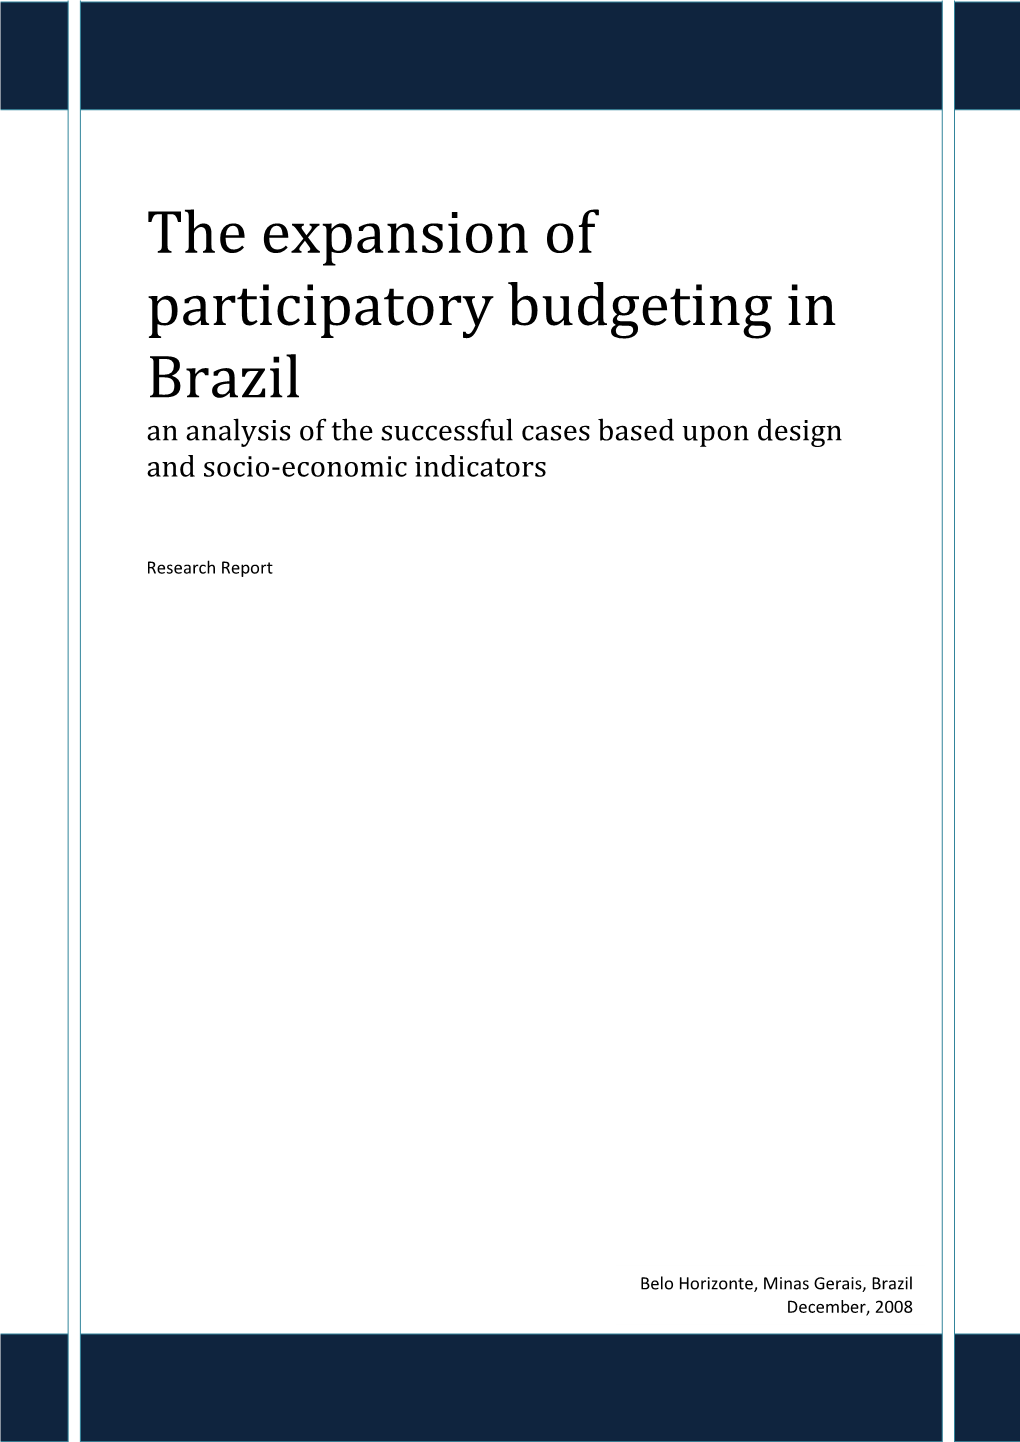 The Expansion of Participatory Budgeting in Brazil an Analysis of the Successful Cases Based Upon Design and Socio-Economic Indicators